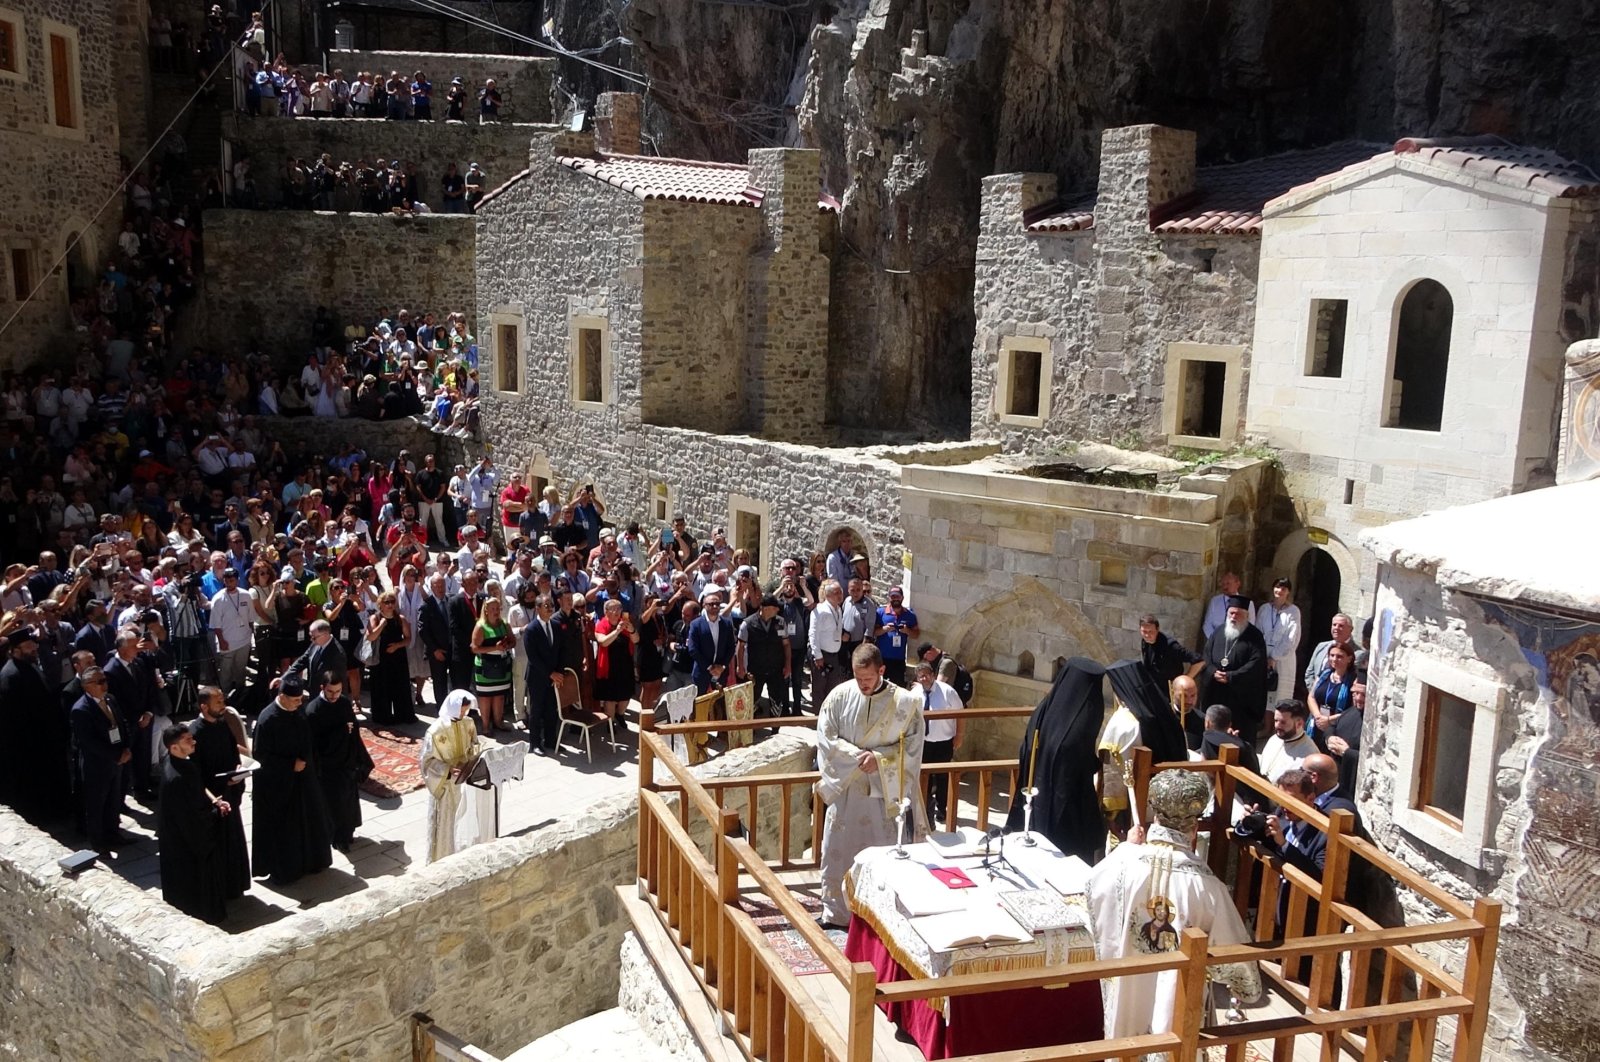 People attend the religious service at Sümela Monastery, in Trabzon, northern Türkiye, Aug. 15, 2022. (DHA Photo)